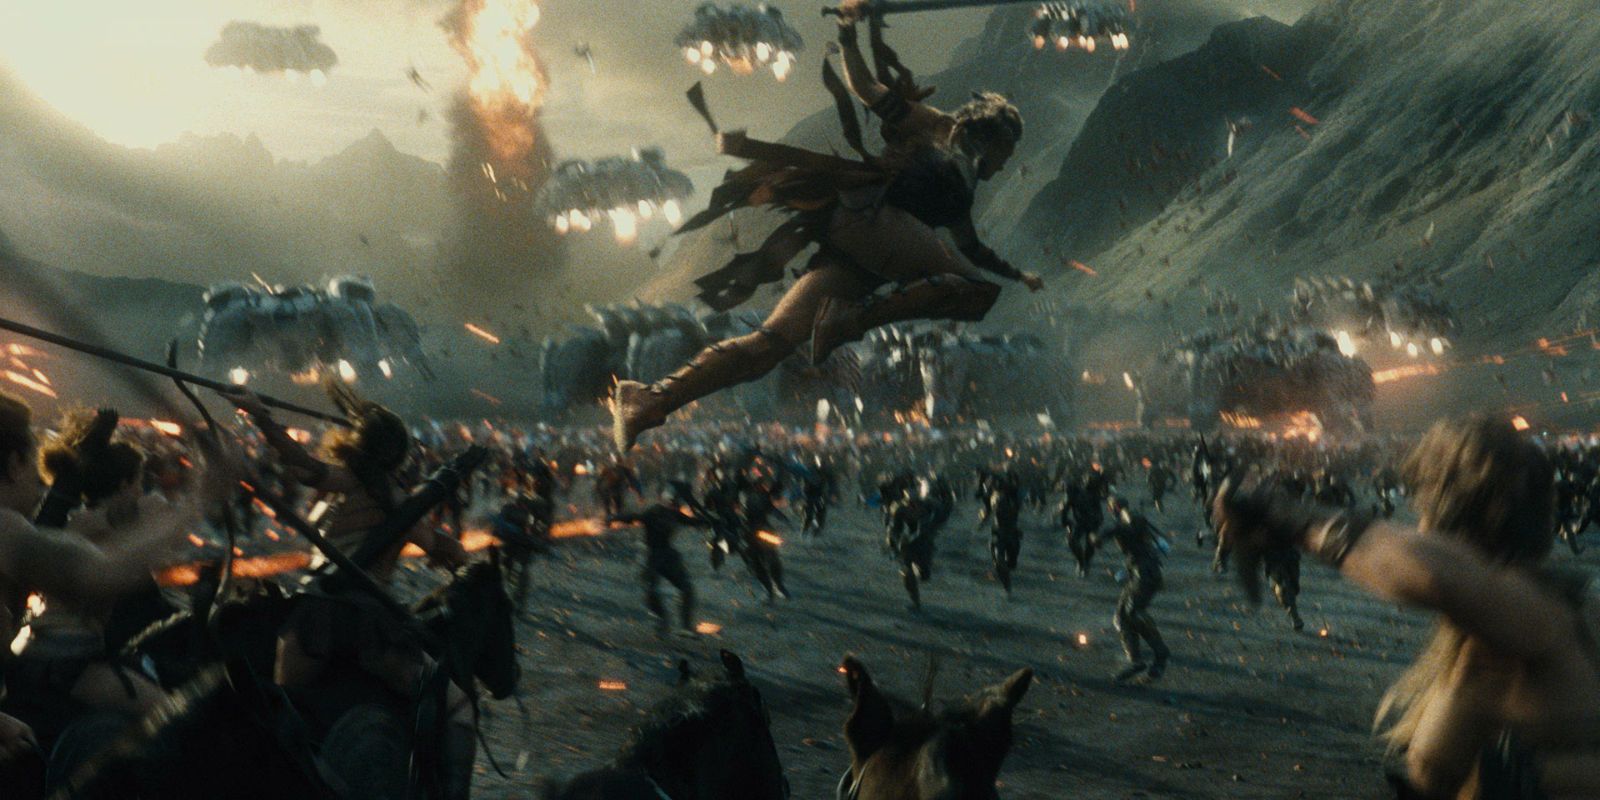 Justice League - Amazons fighting parademons